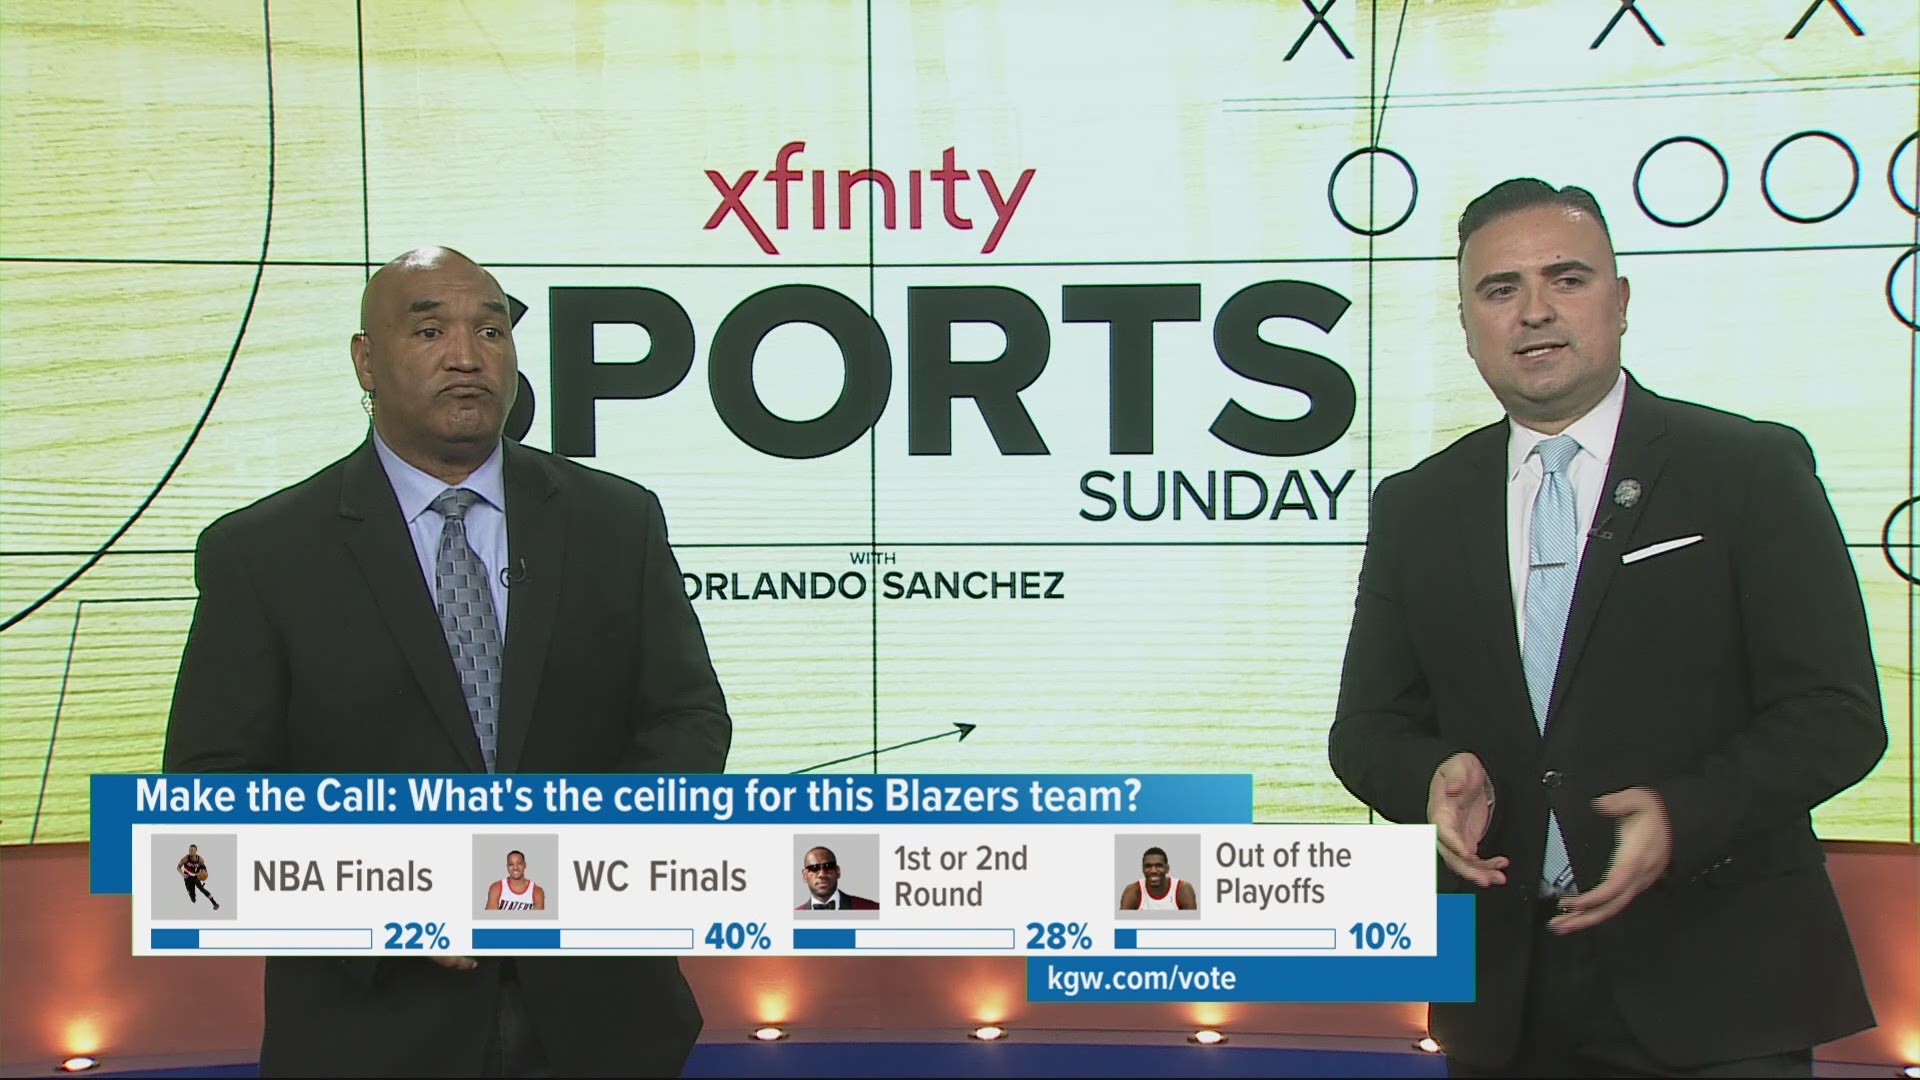 With the Portland Trail Blazers off to a 10-3 start, KGW's Orlando Sanchez and Art Edwards talk about what the team's ceiling is this season.